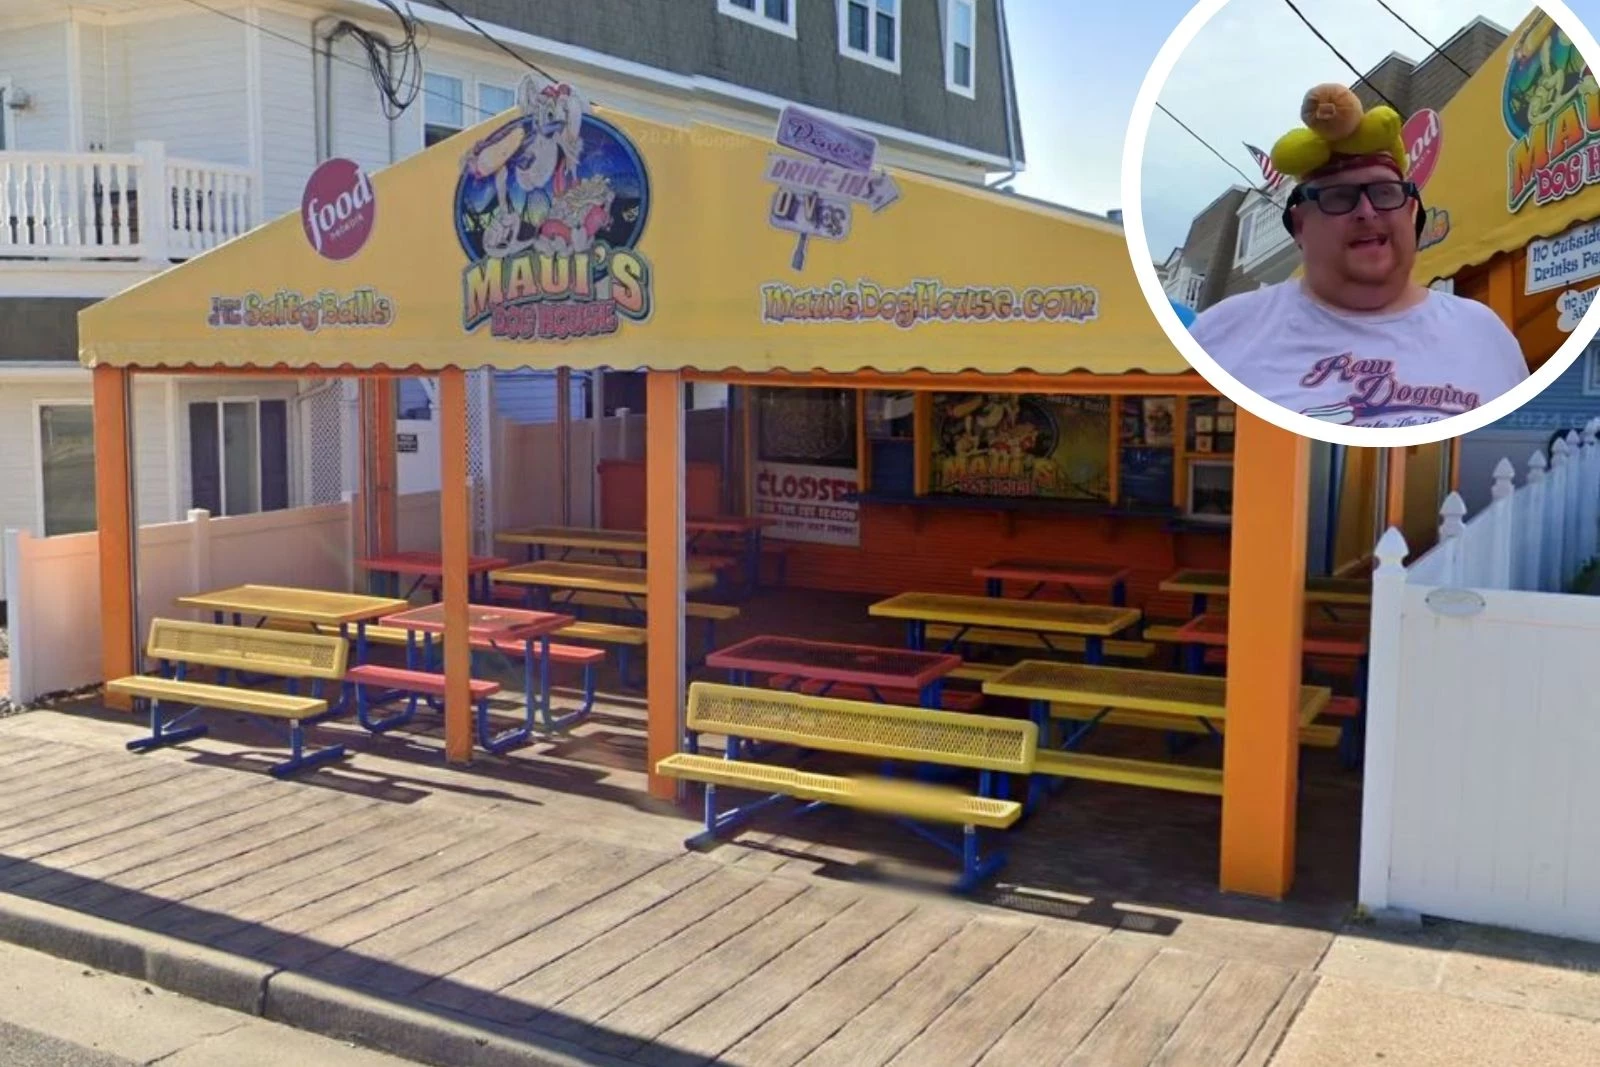 Barstool Sports Personality Makes Visit to Maui’s Dog House in North
Wildwood, NJ